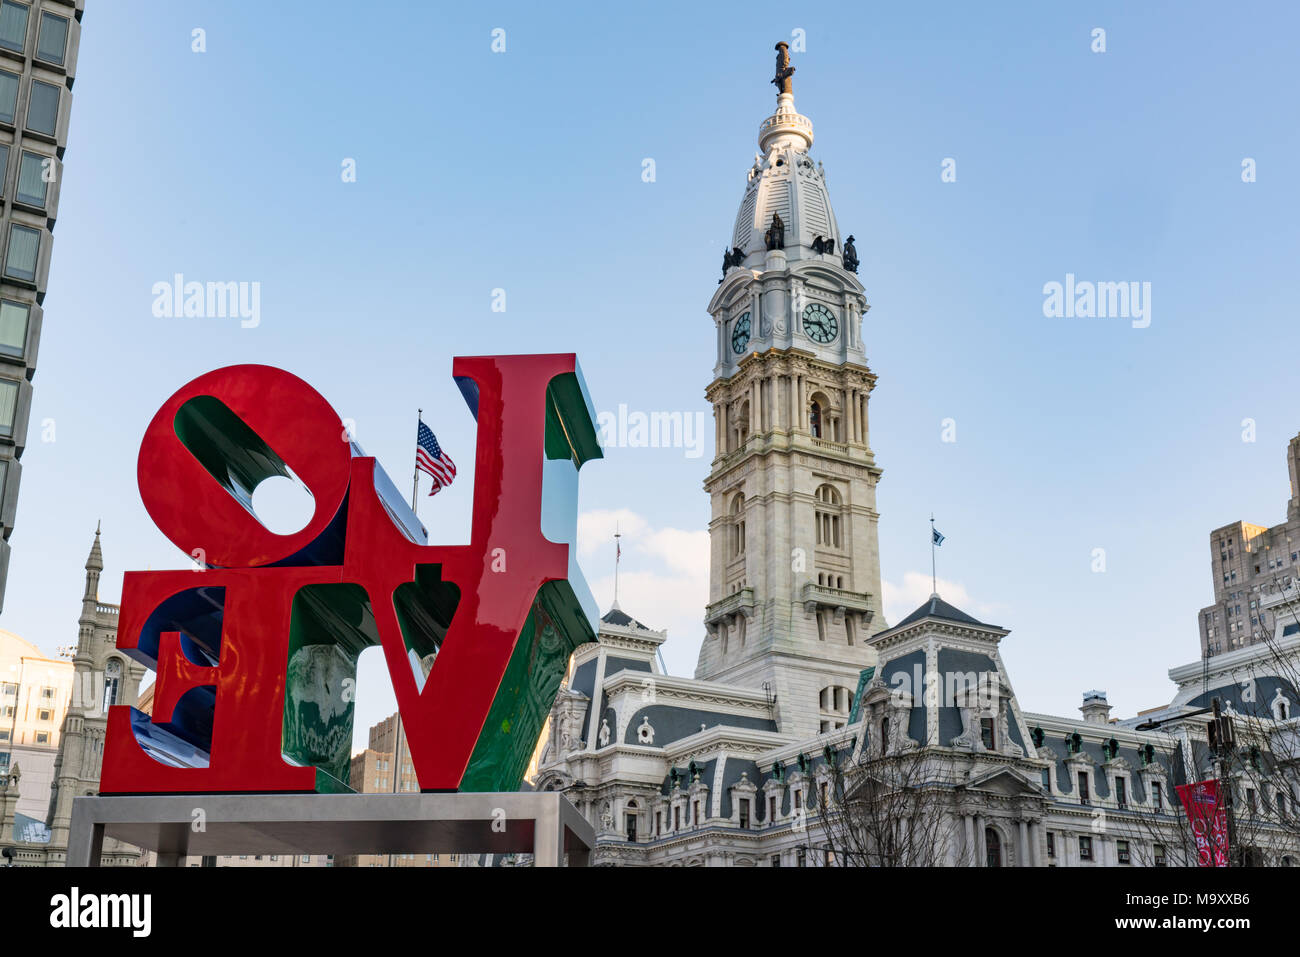 PHILADELPHIA, PA - MARCH 10, 2018: Newly restored LOVE sculpture and City Hall from Love Park in Philadelphia, Pennsylvania Stock Photo